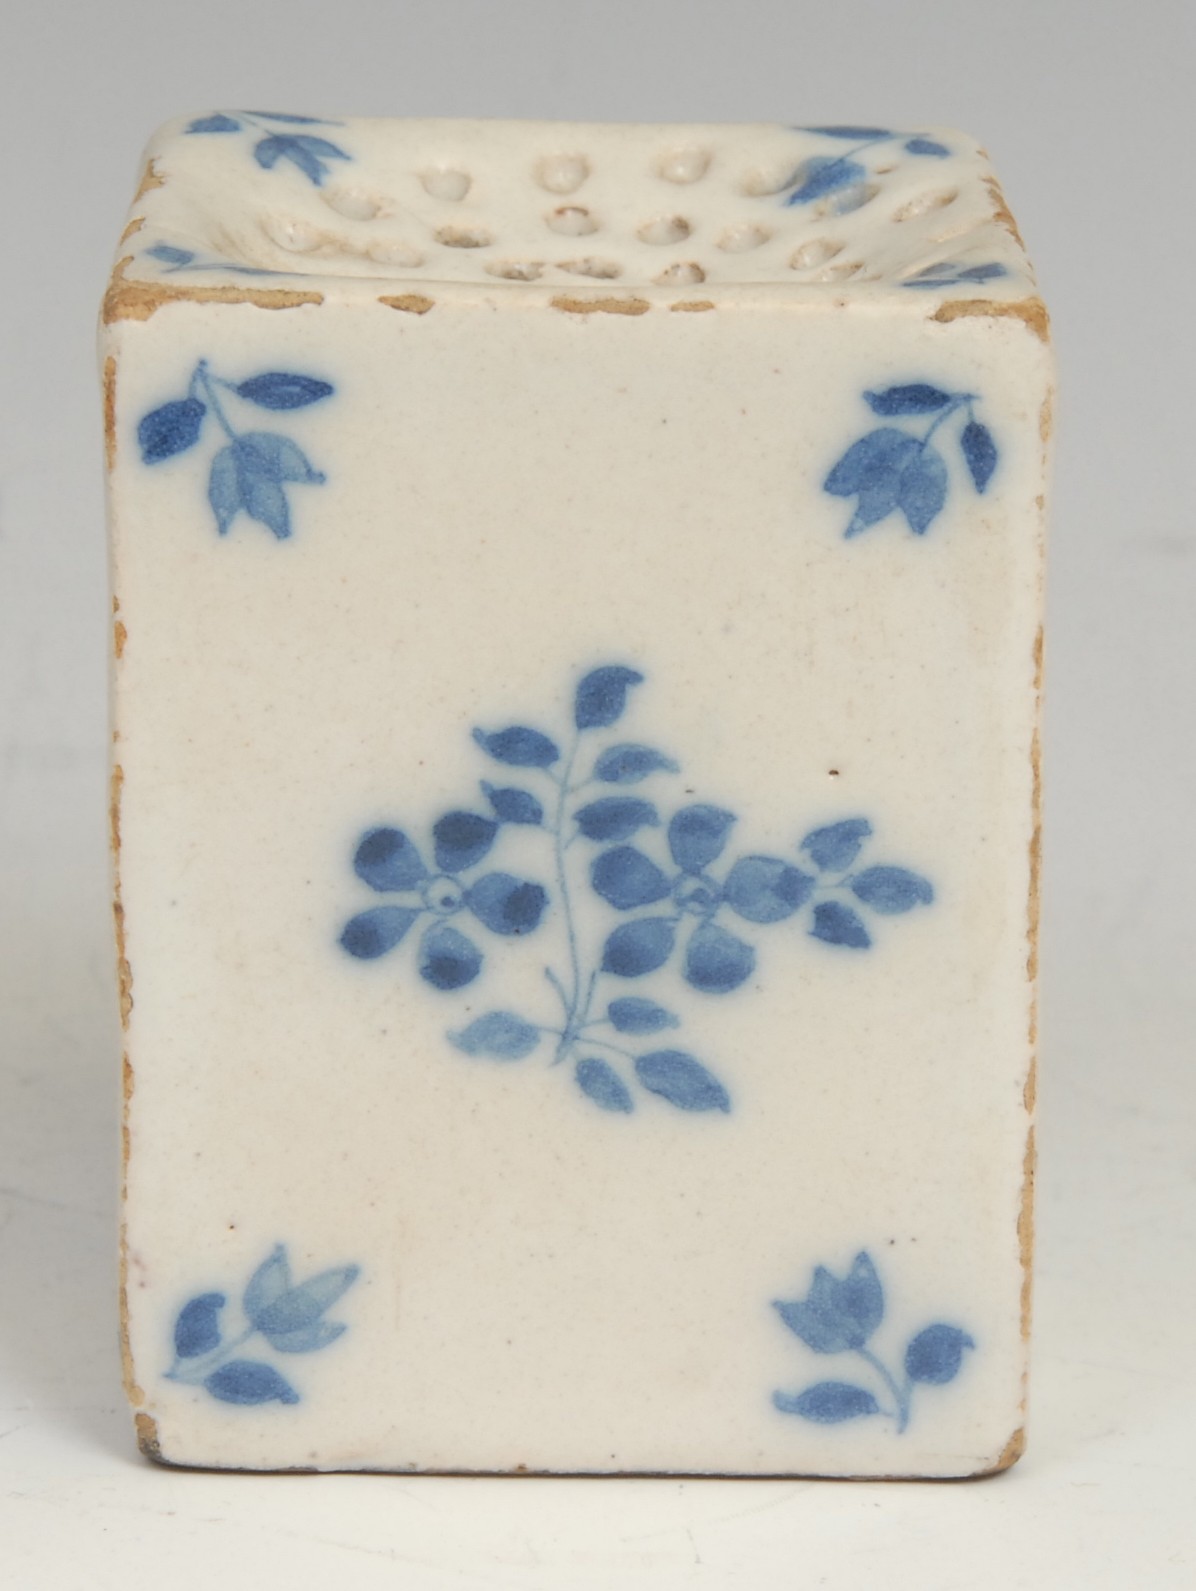 An 18th century Delft square pounce pot, painted in tones of blue with scattered floral sprigs, - Image 3 of 5